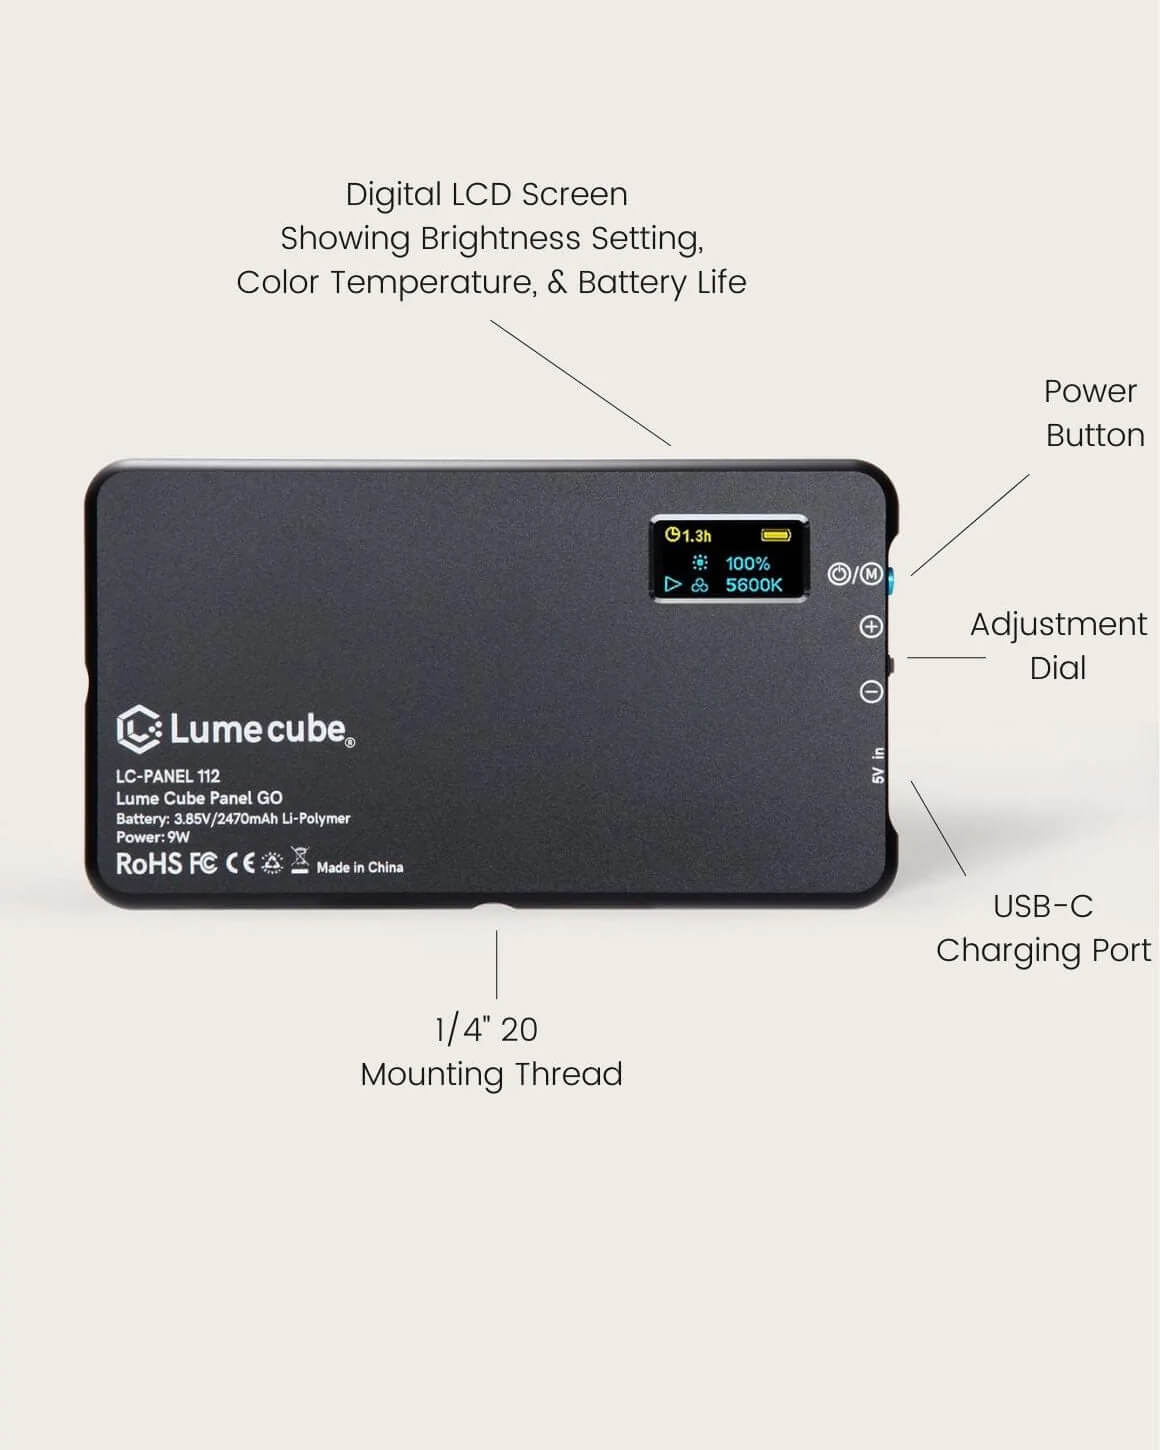 Back view of the black 4" Lume Cube Panel GO explaining all buttons and LCD screen indicators on the LED light panel.